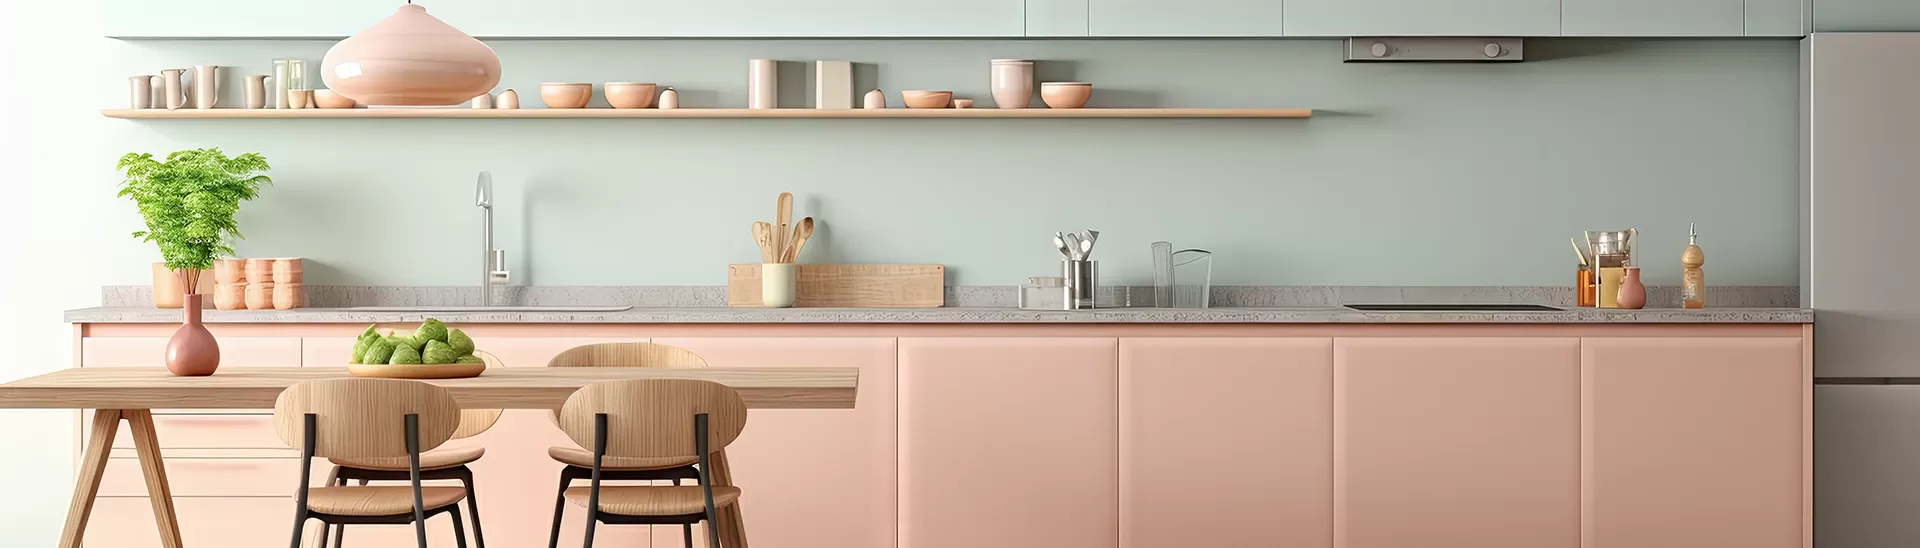 Revamp Your Kitchen with These Bright Wall Colors: Transforming Dull Spaces